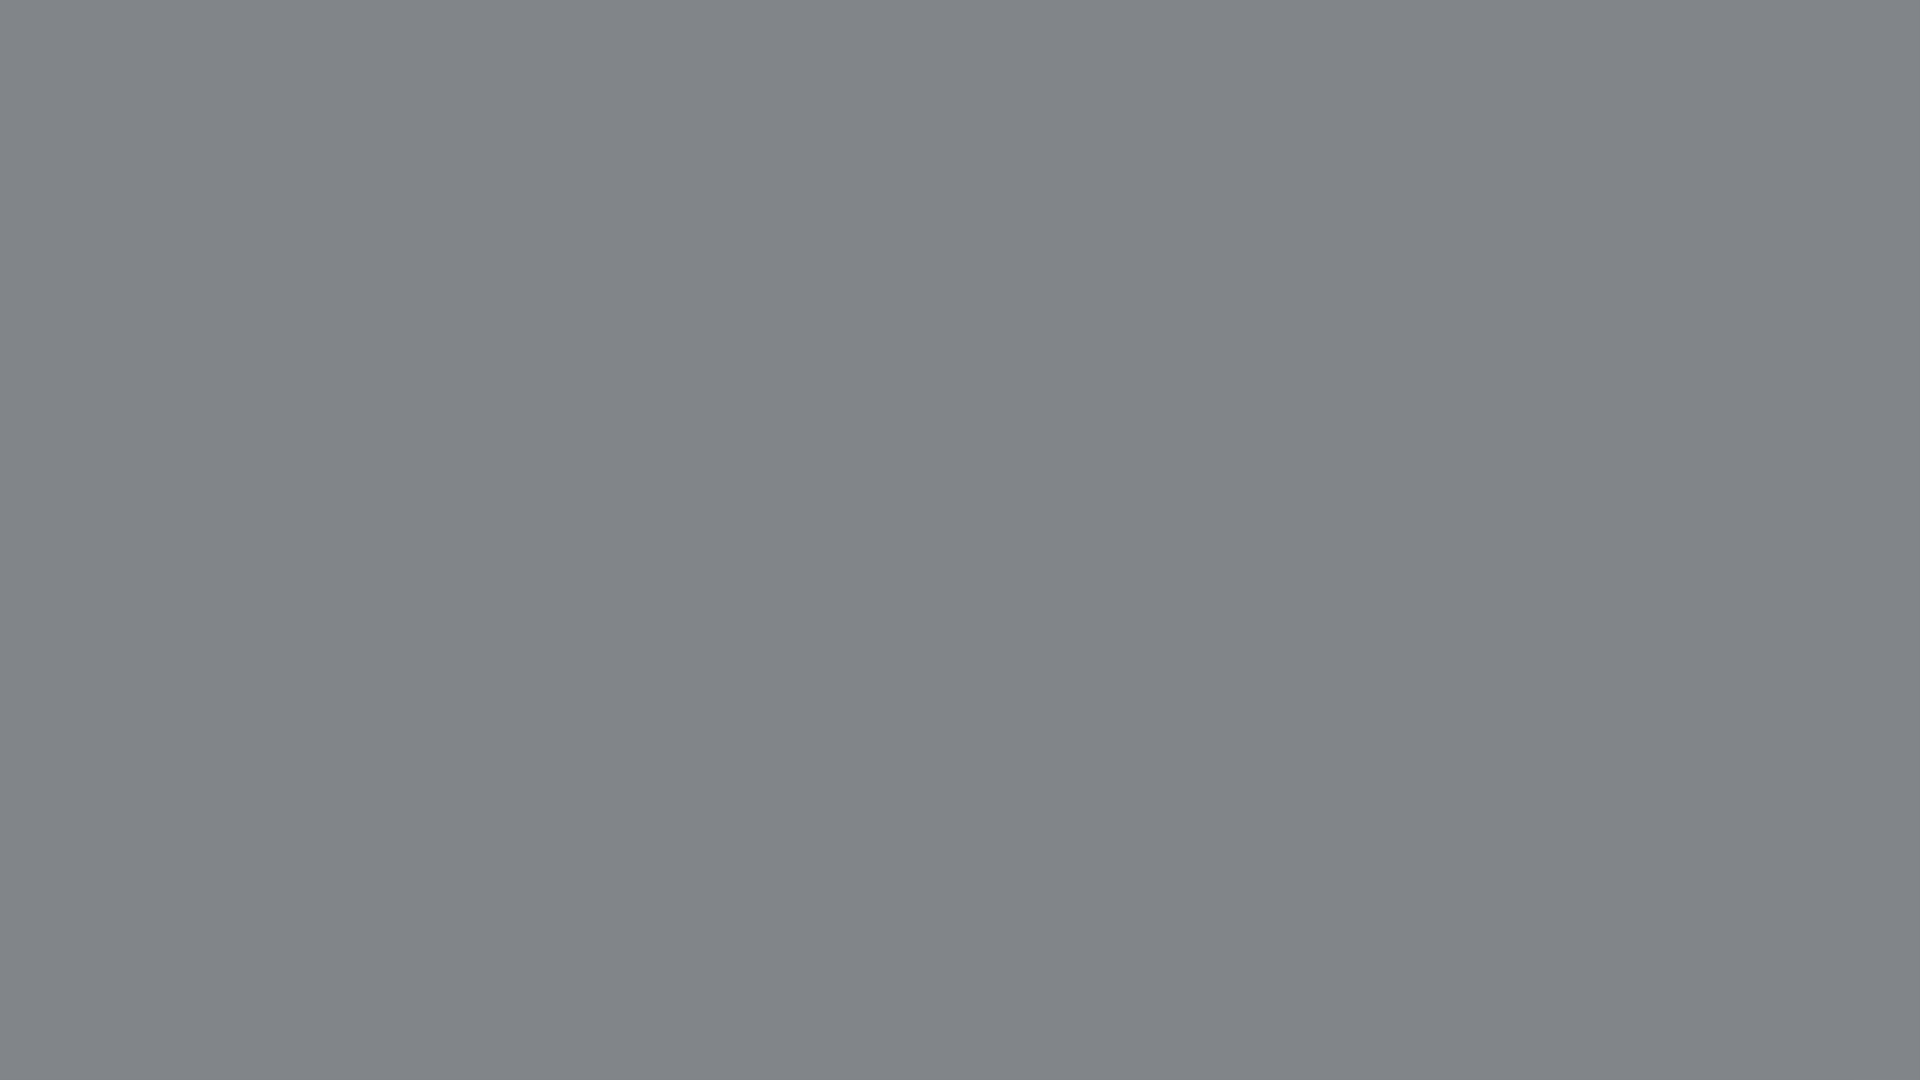 colorswall on X: Tints of Gunmetal color #2C3539 hex #2c3539, #41494d,  #565d61, #6b7274, #808688, #969a9c, #abaeb0, #c0c2c4, #d5d7d7, #eaebeb # colors #palette   / X